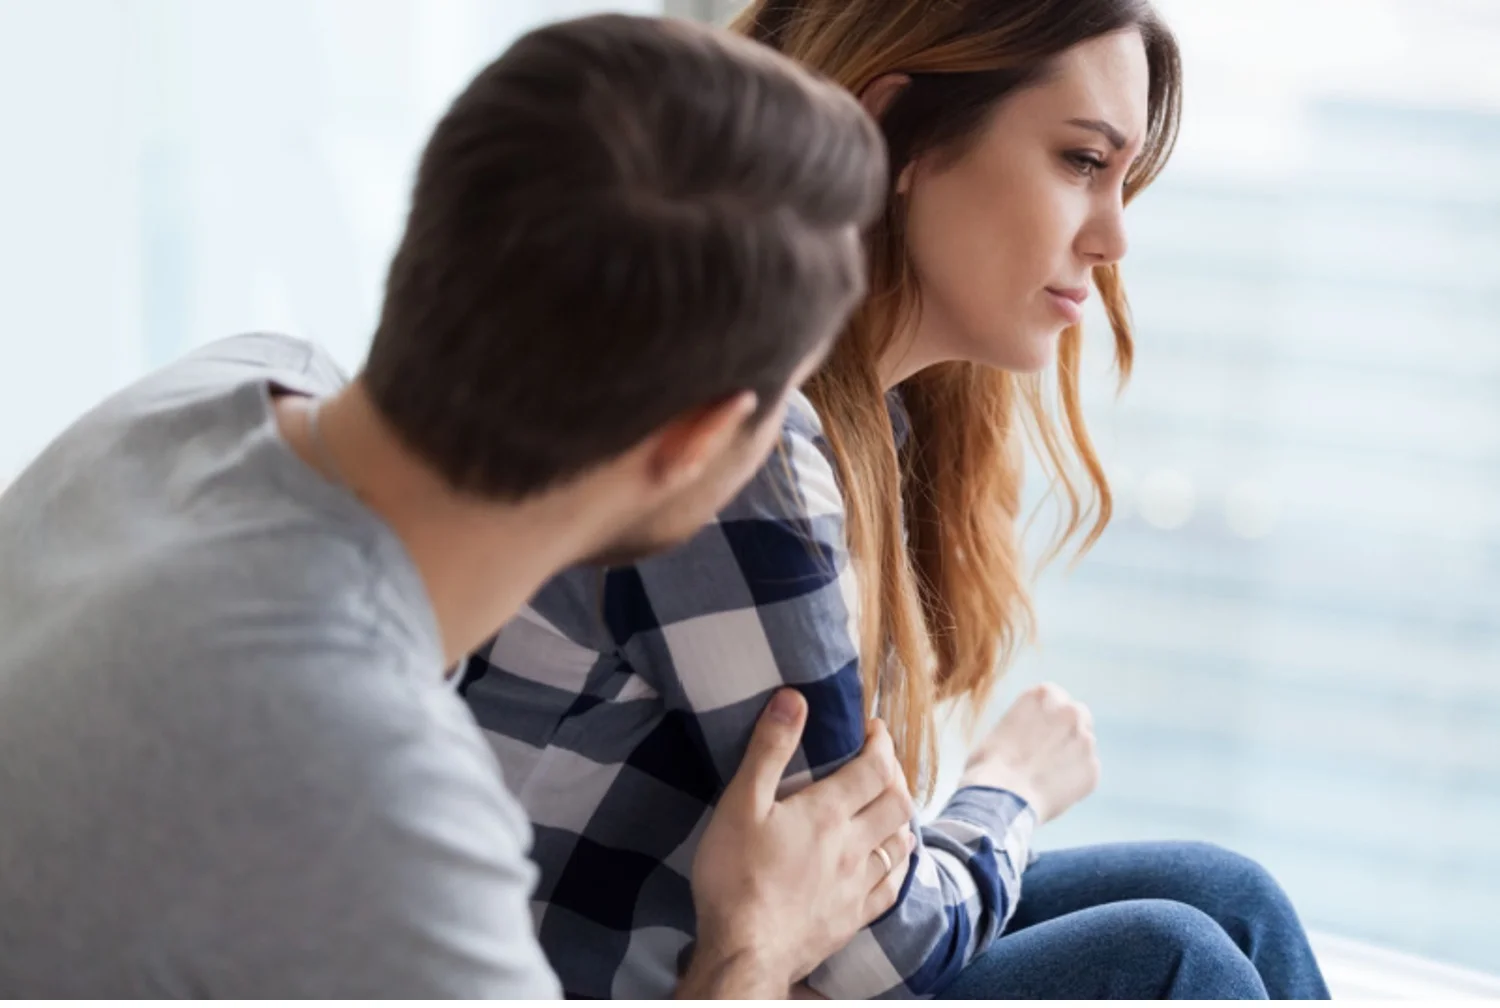 Concerned man comforts anxious woman